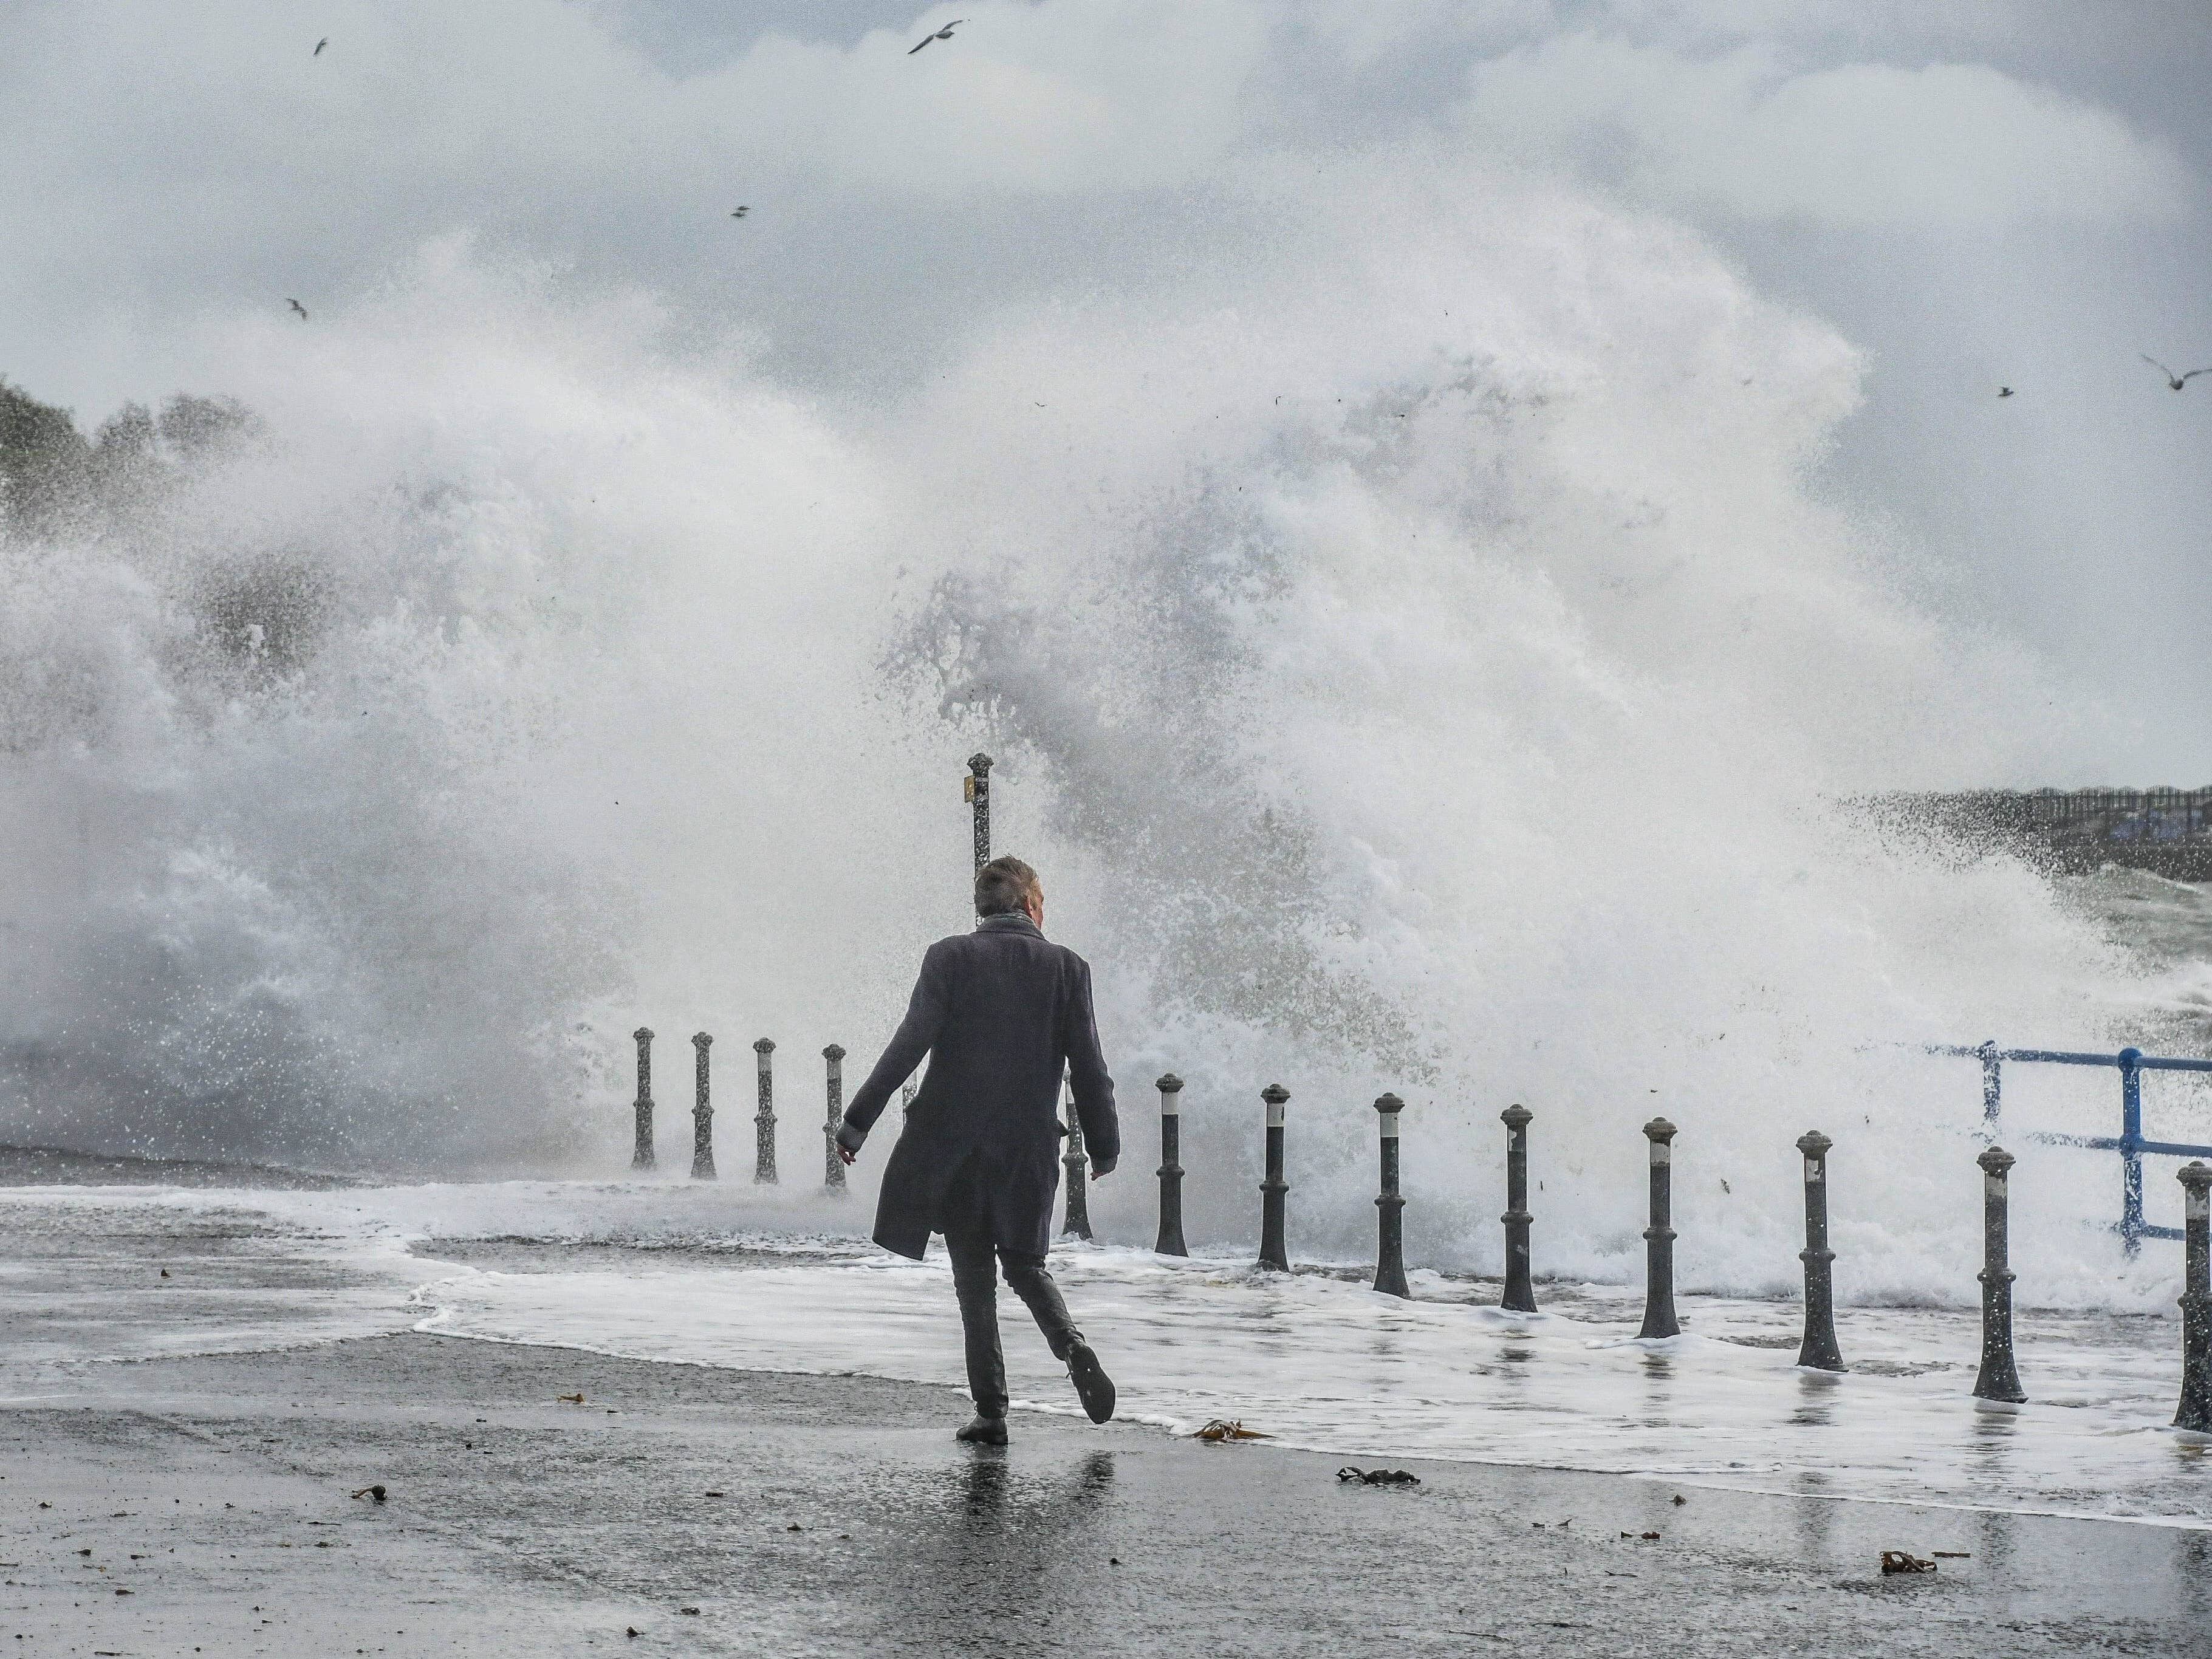 Flood alerts and wind warnings issued as Scotland battles Storm Kathleen